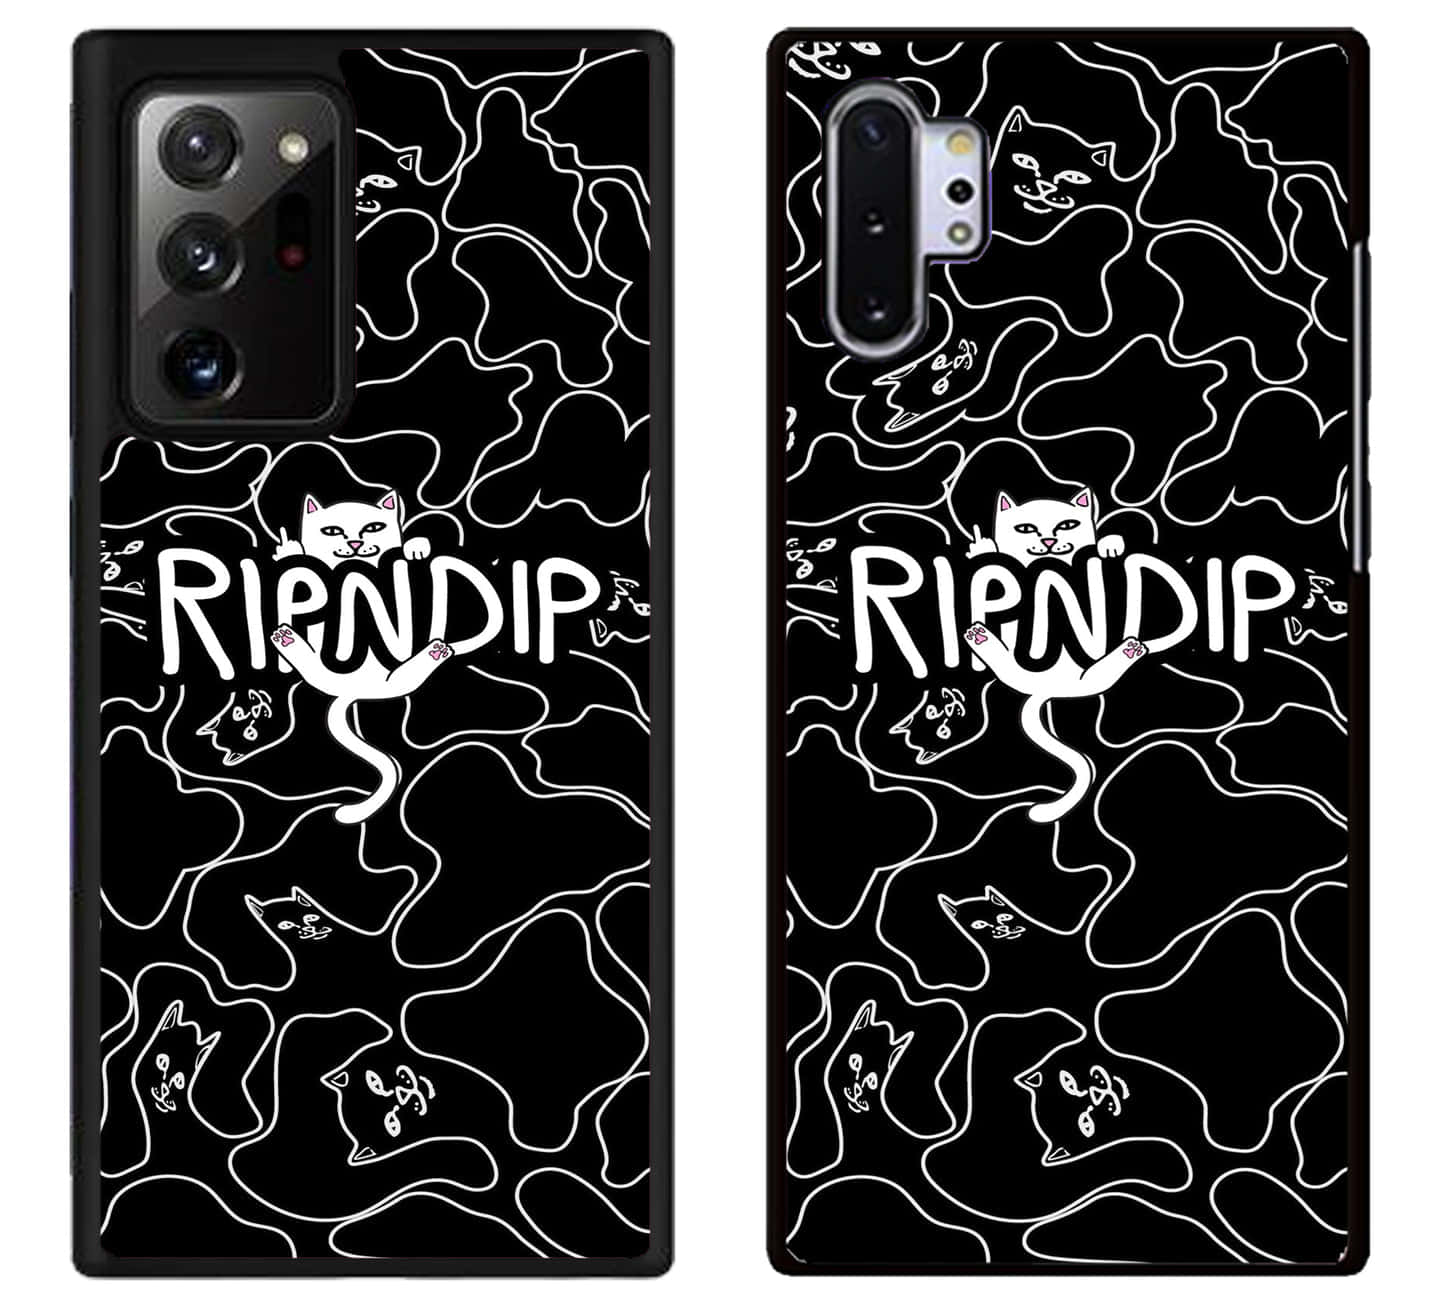 A Black And White Camouflage Samsung Galaxy S10 Case With The Word Frienddip Wallpaper